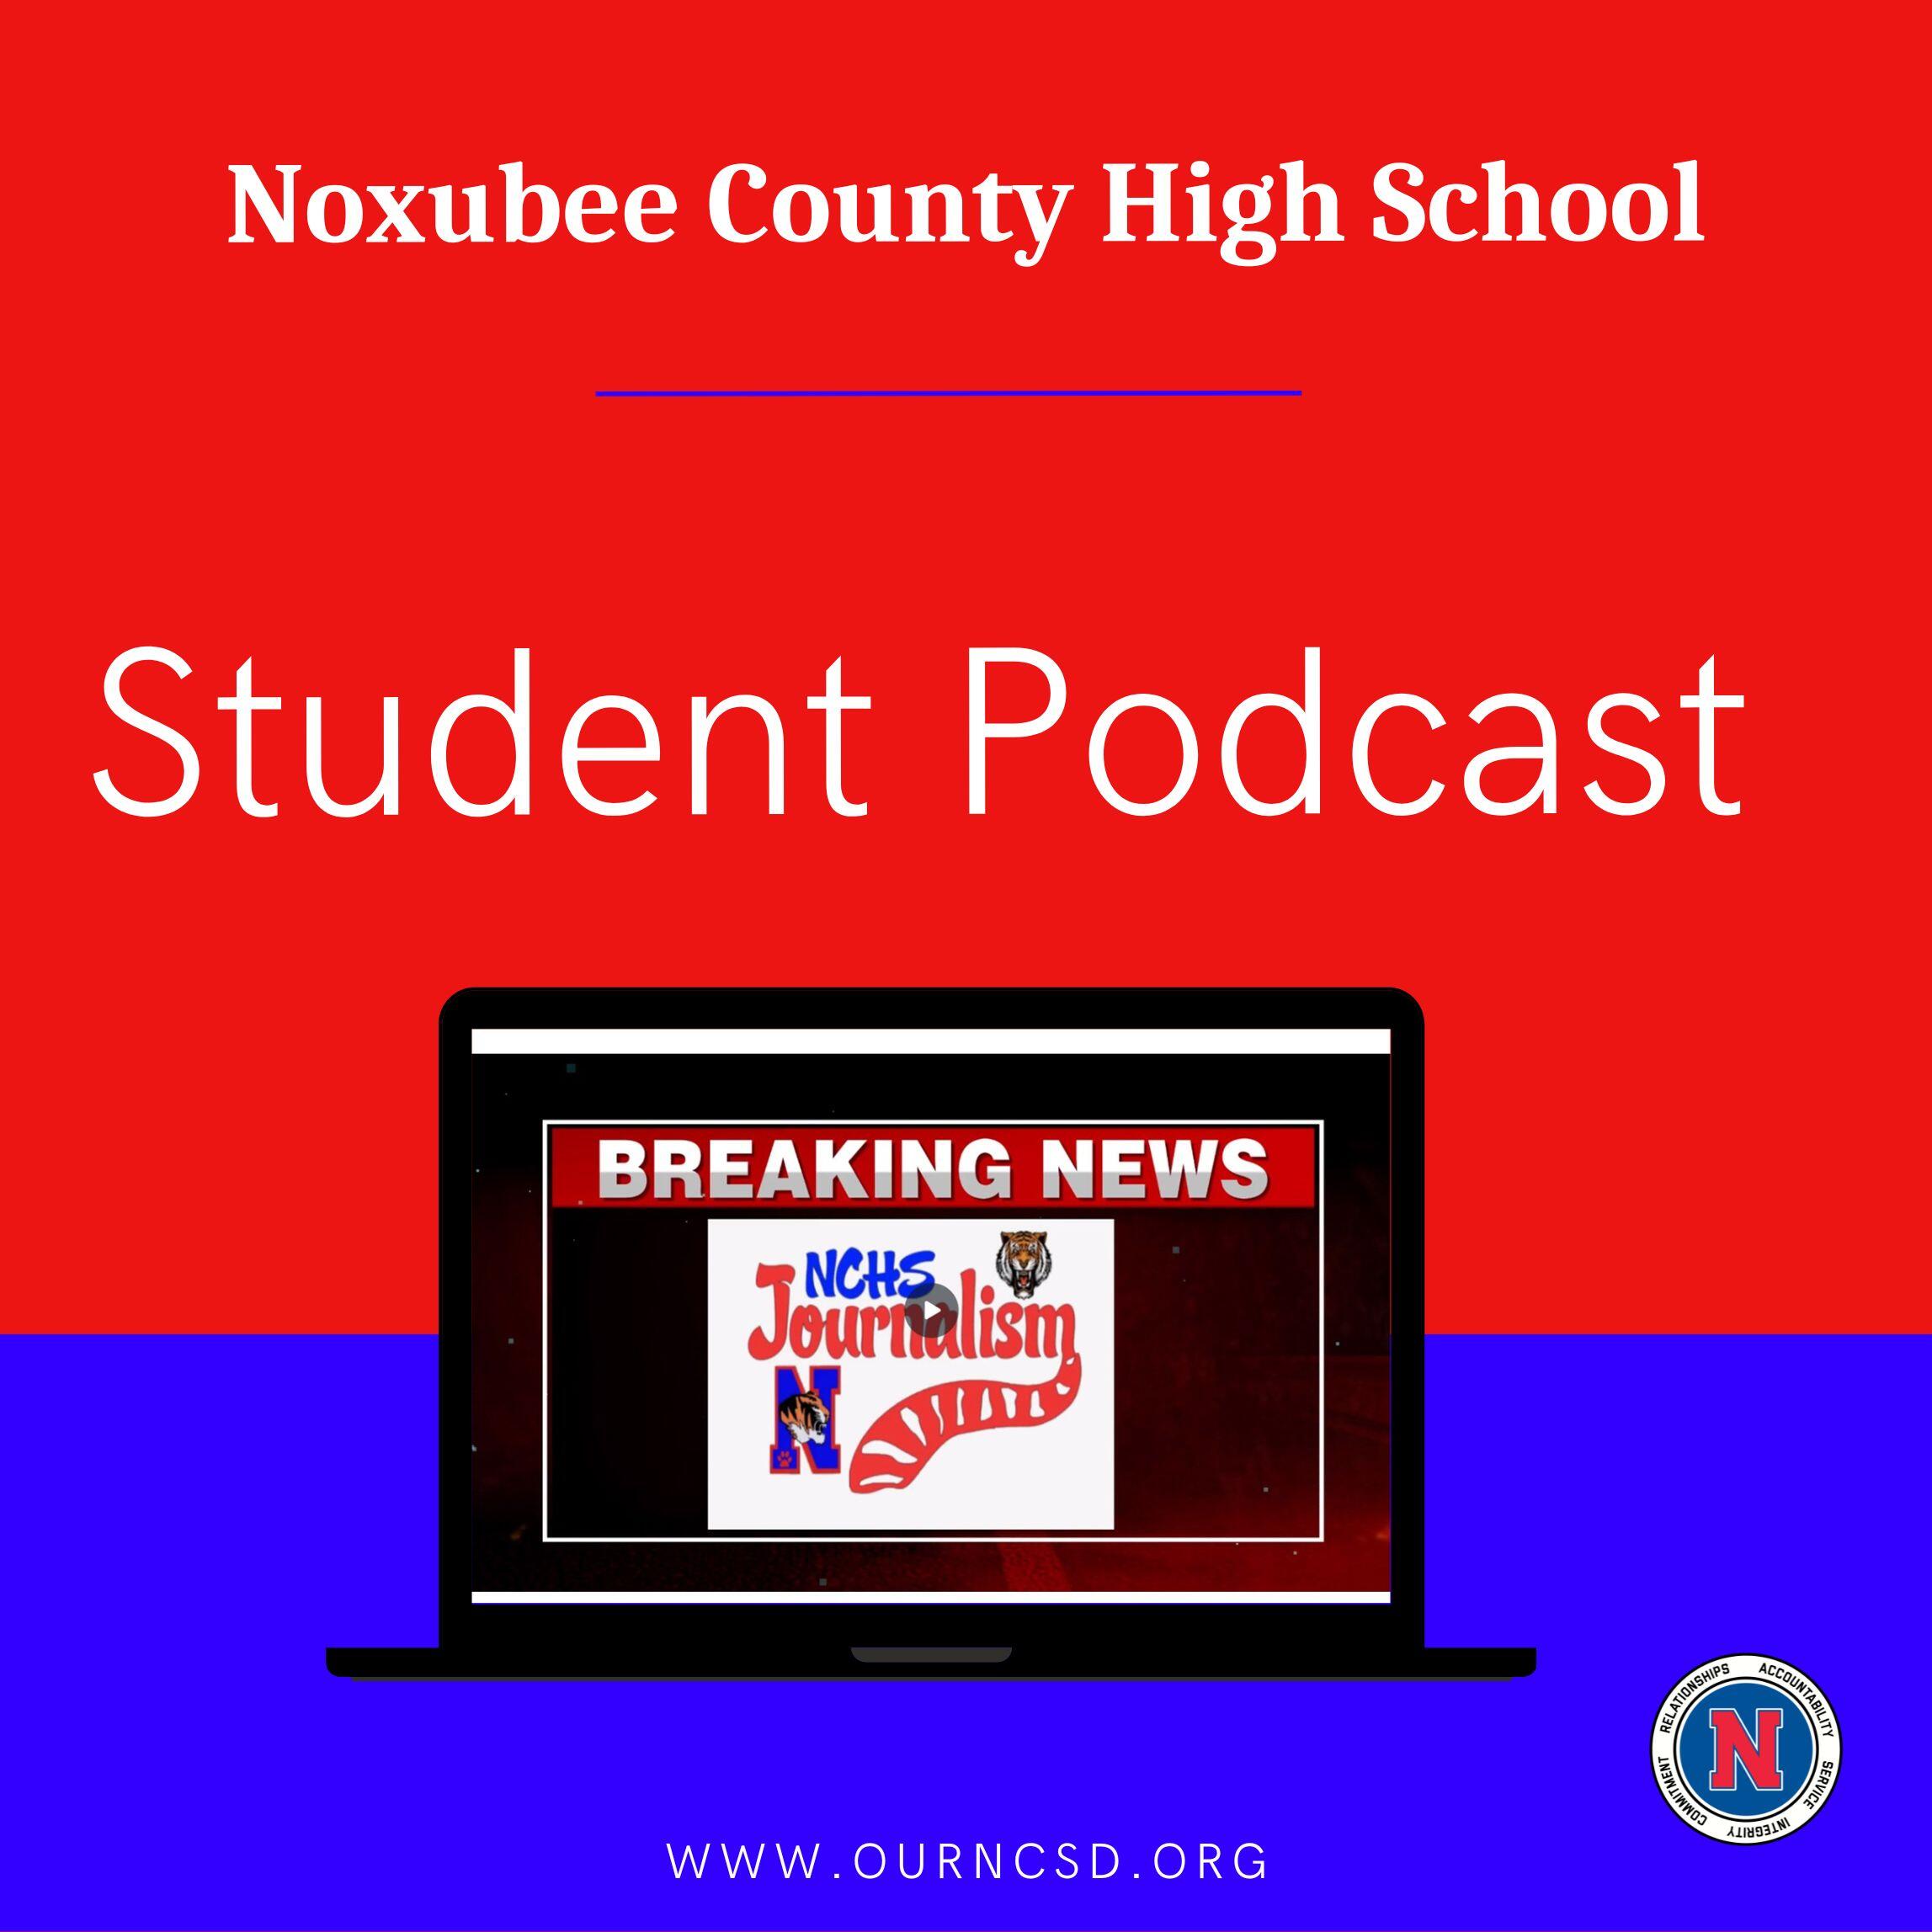 NCHS Student Podcast